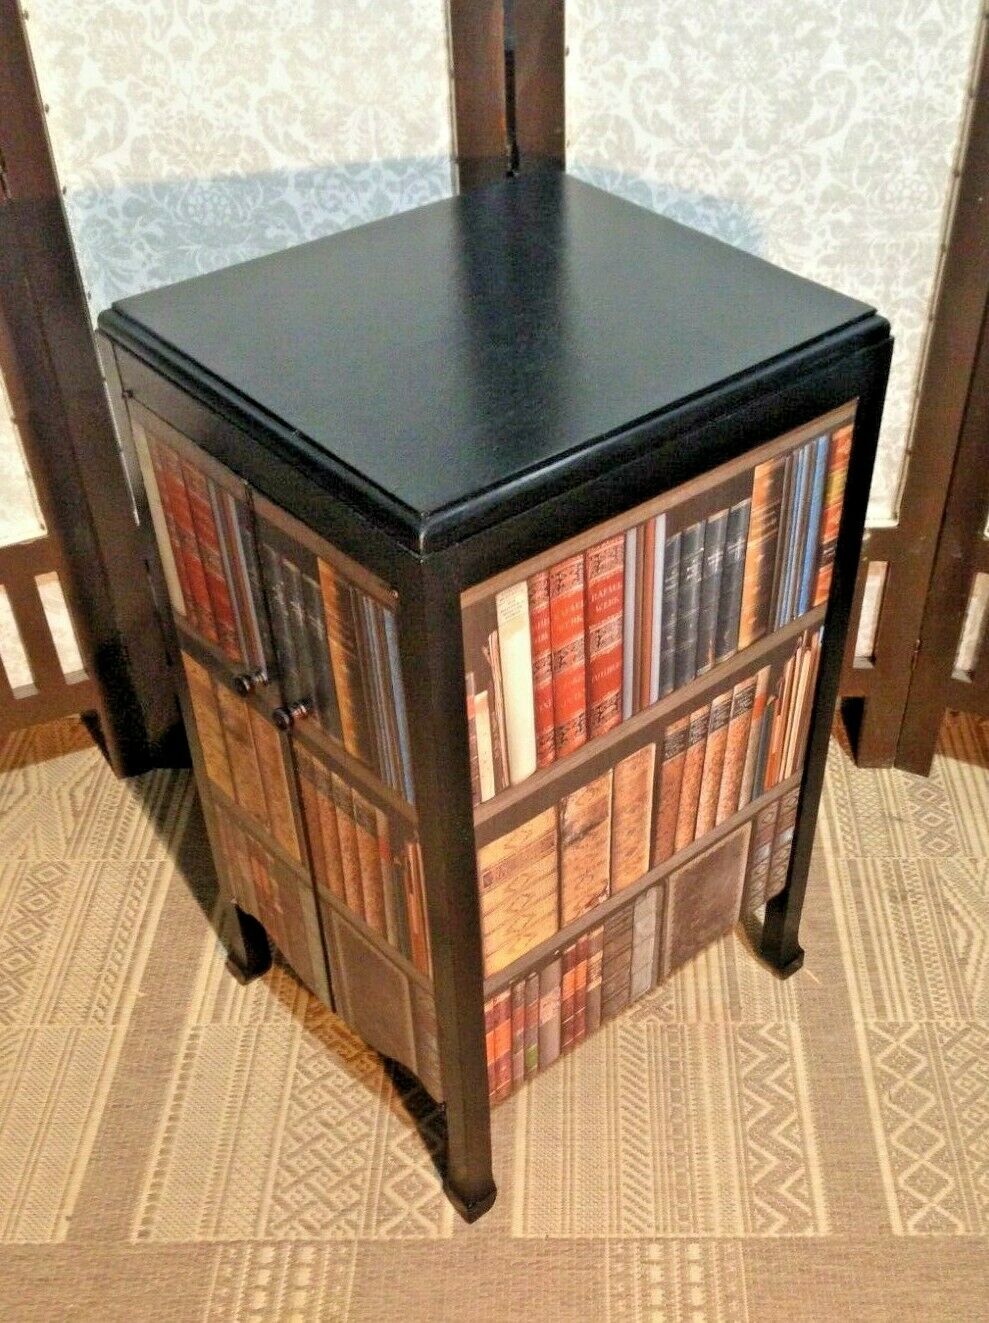 Upcycled Music Cabinet / Bedside Lamp Table